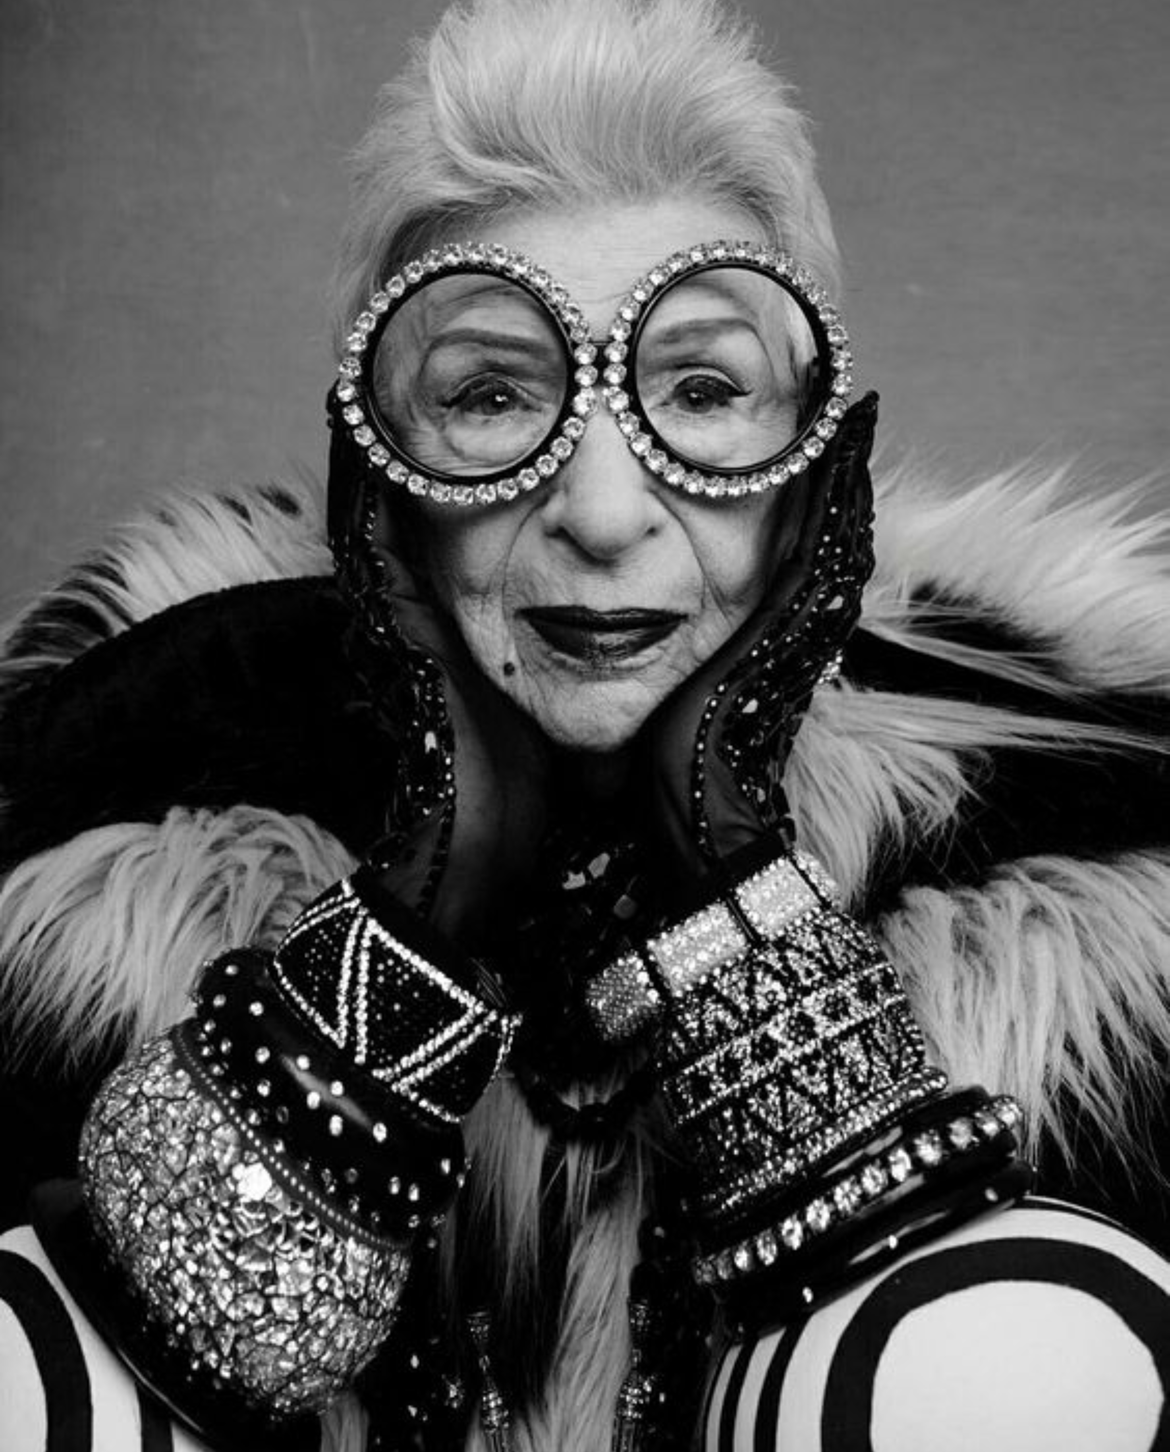 Iris Apfel - A Visionary of Style